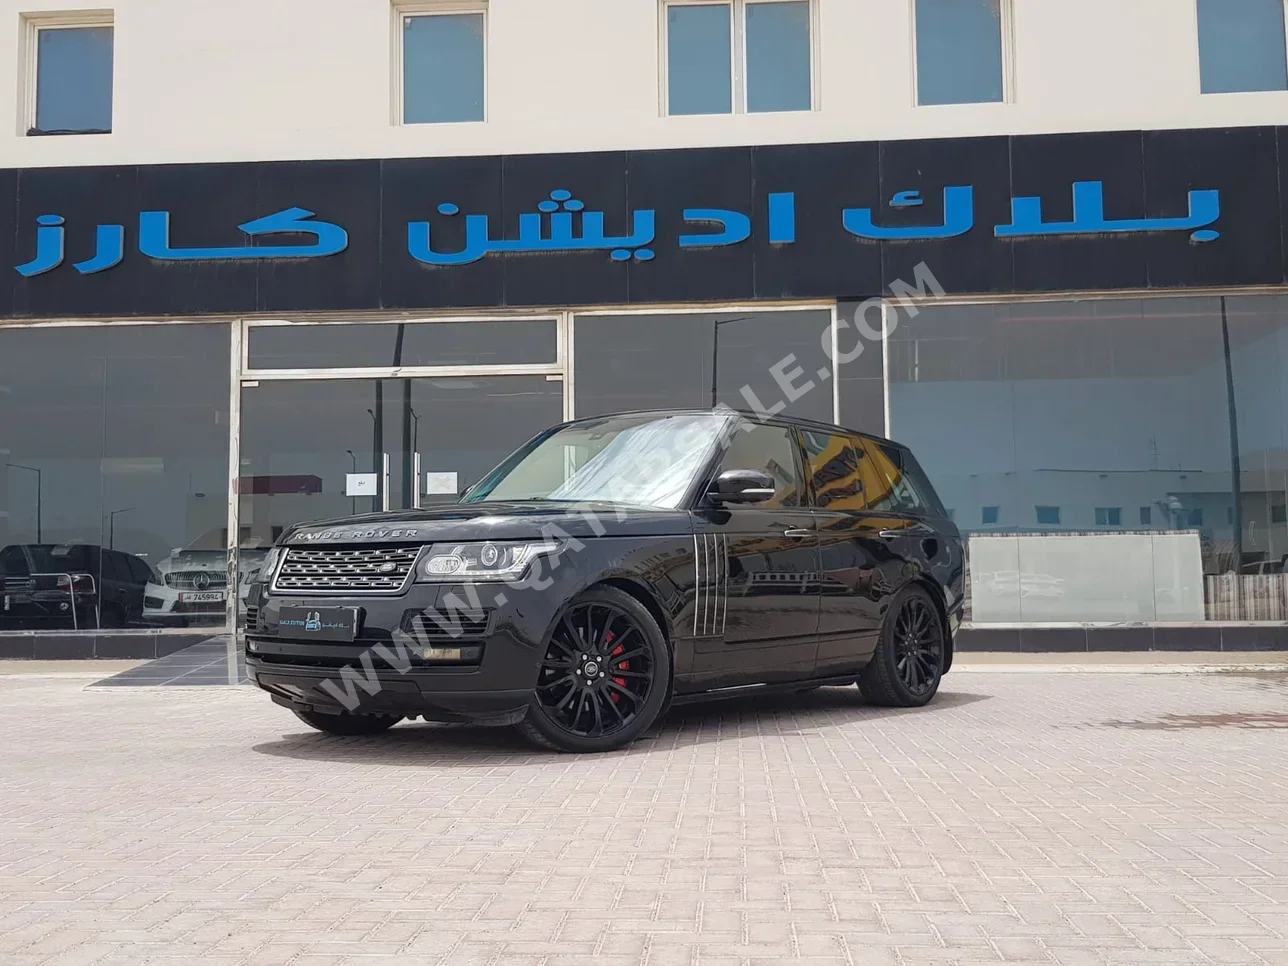 Land Rover  Range Rover  Vogue  Autobiography  2014  Automatic  149,000 Km  8 Cylinder  Four Wheel Drive (4WD)  SUV  Black